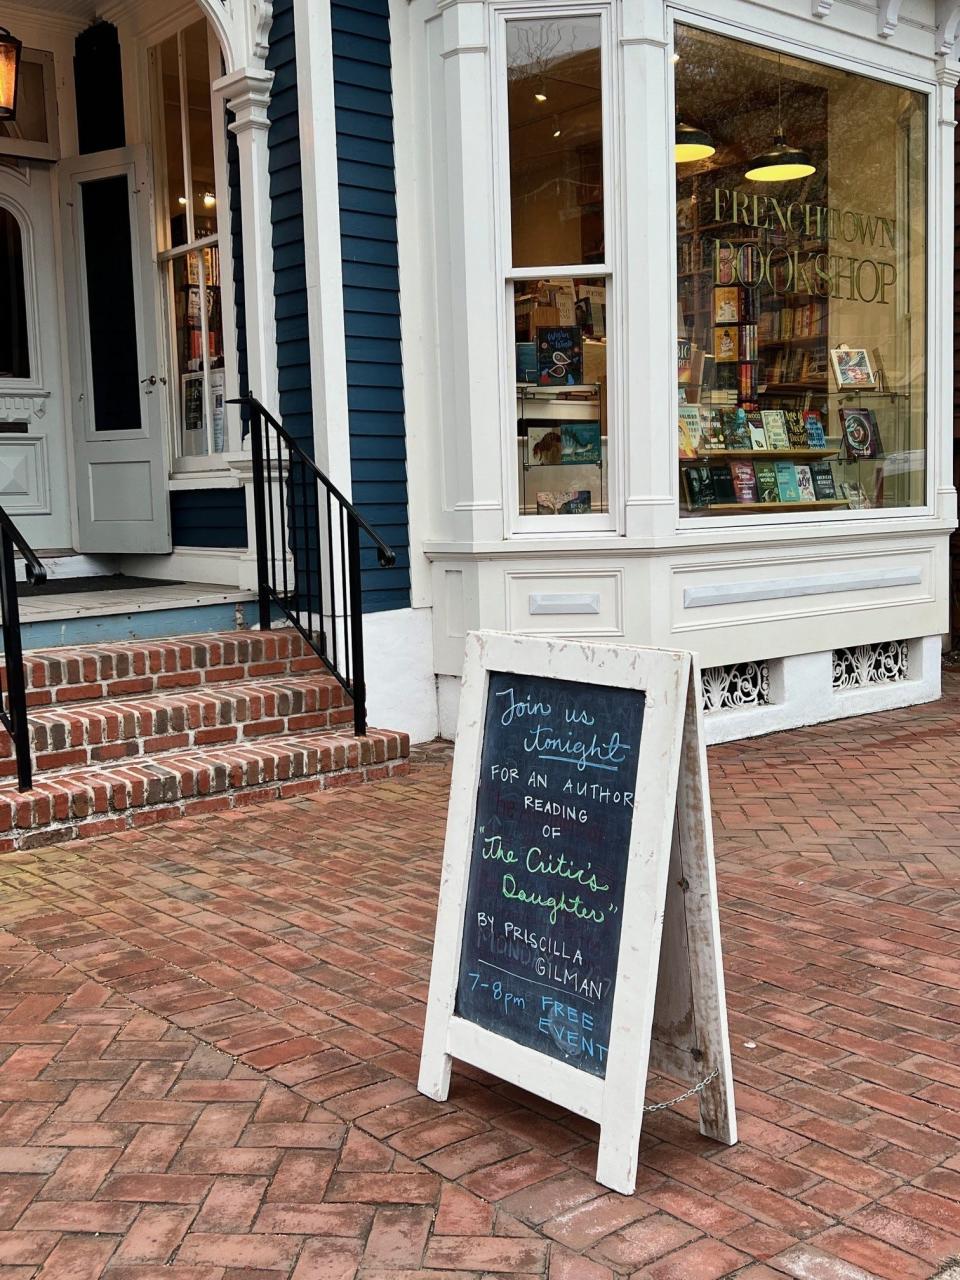 The Frenchtown Bookshop has hosted outdoor concerts and events in the 1,200-square-foot outdoor space since it revived the former home of the Book Garden in 2021.